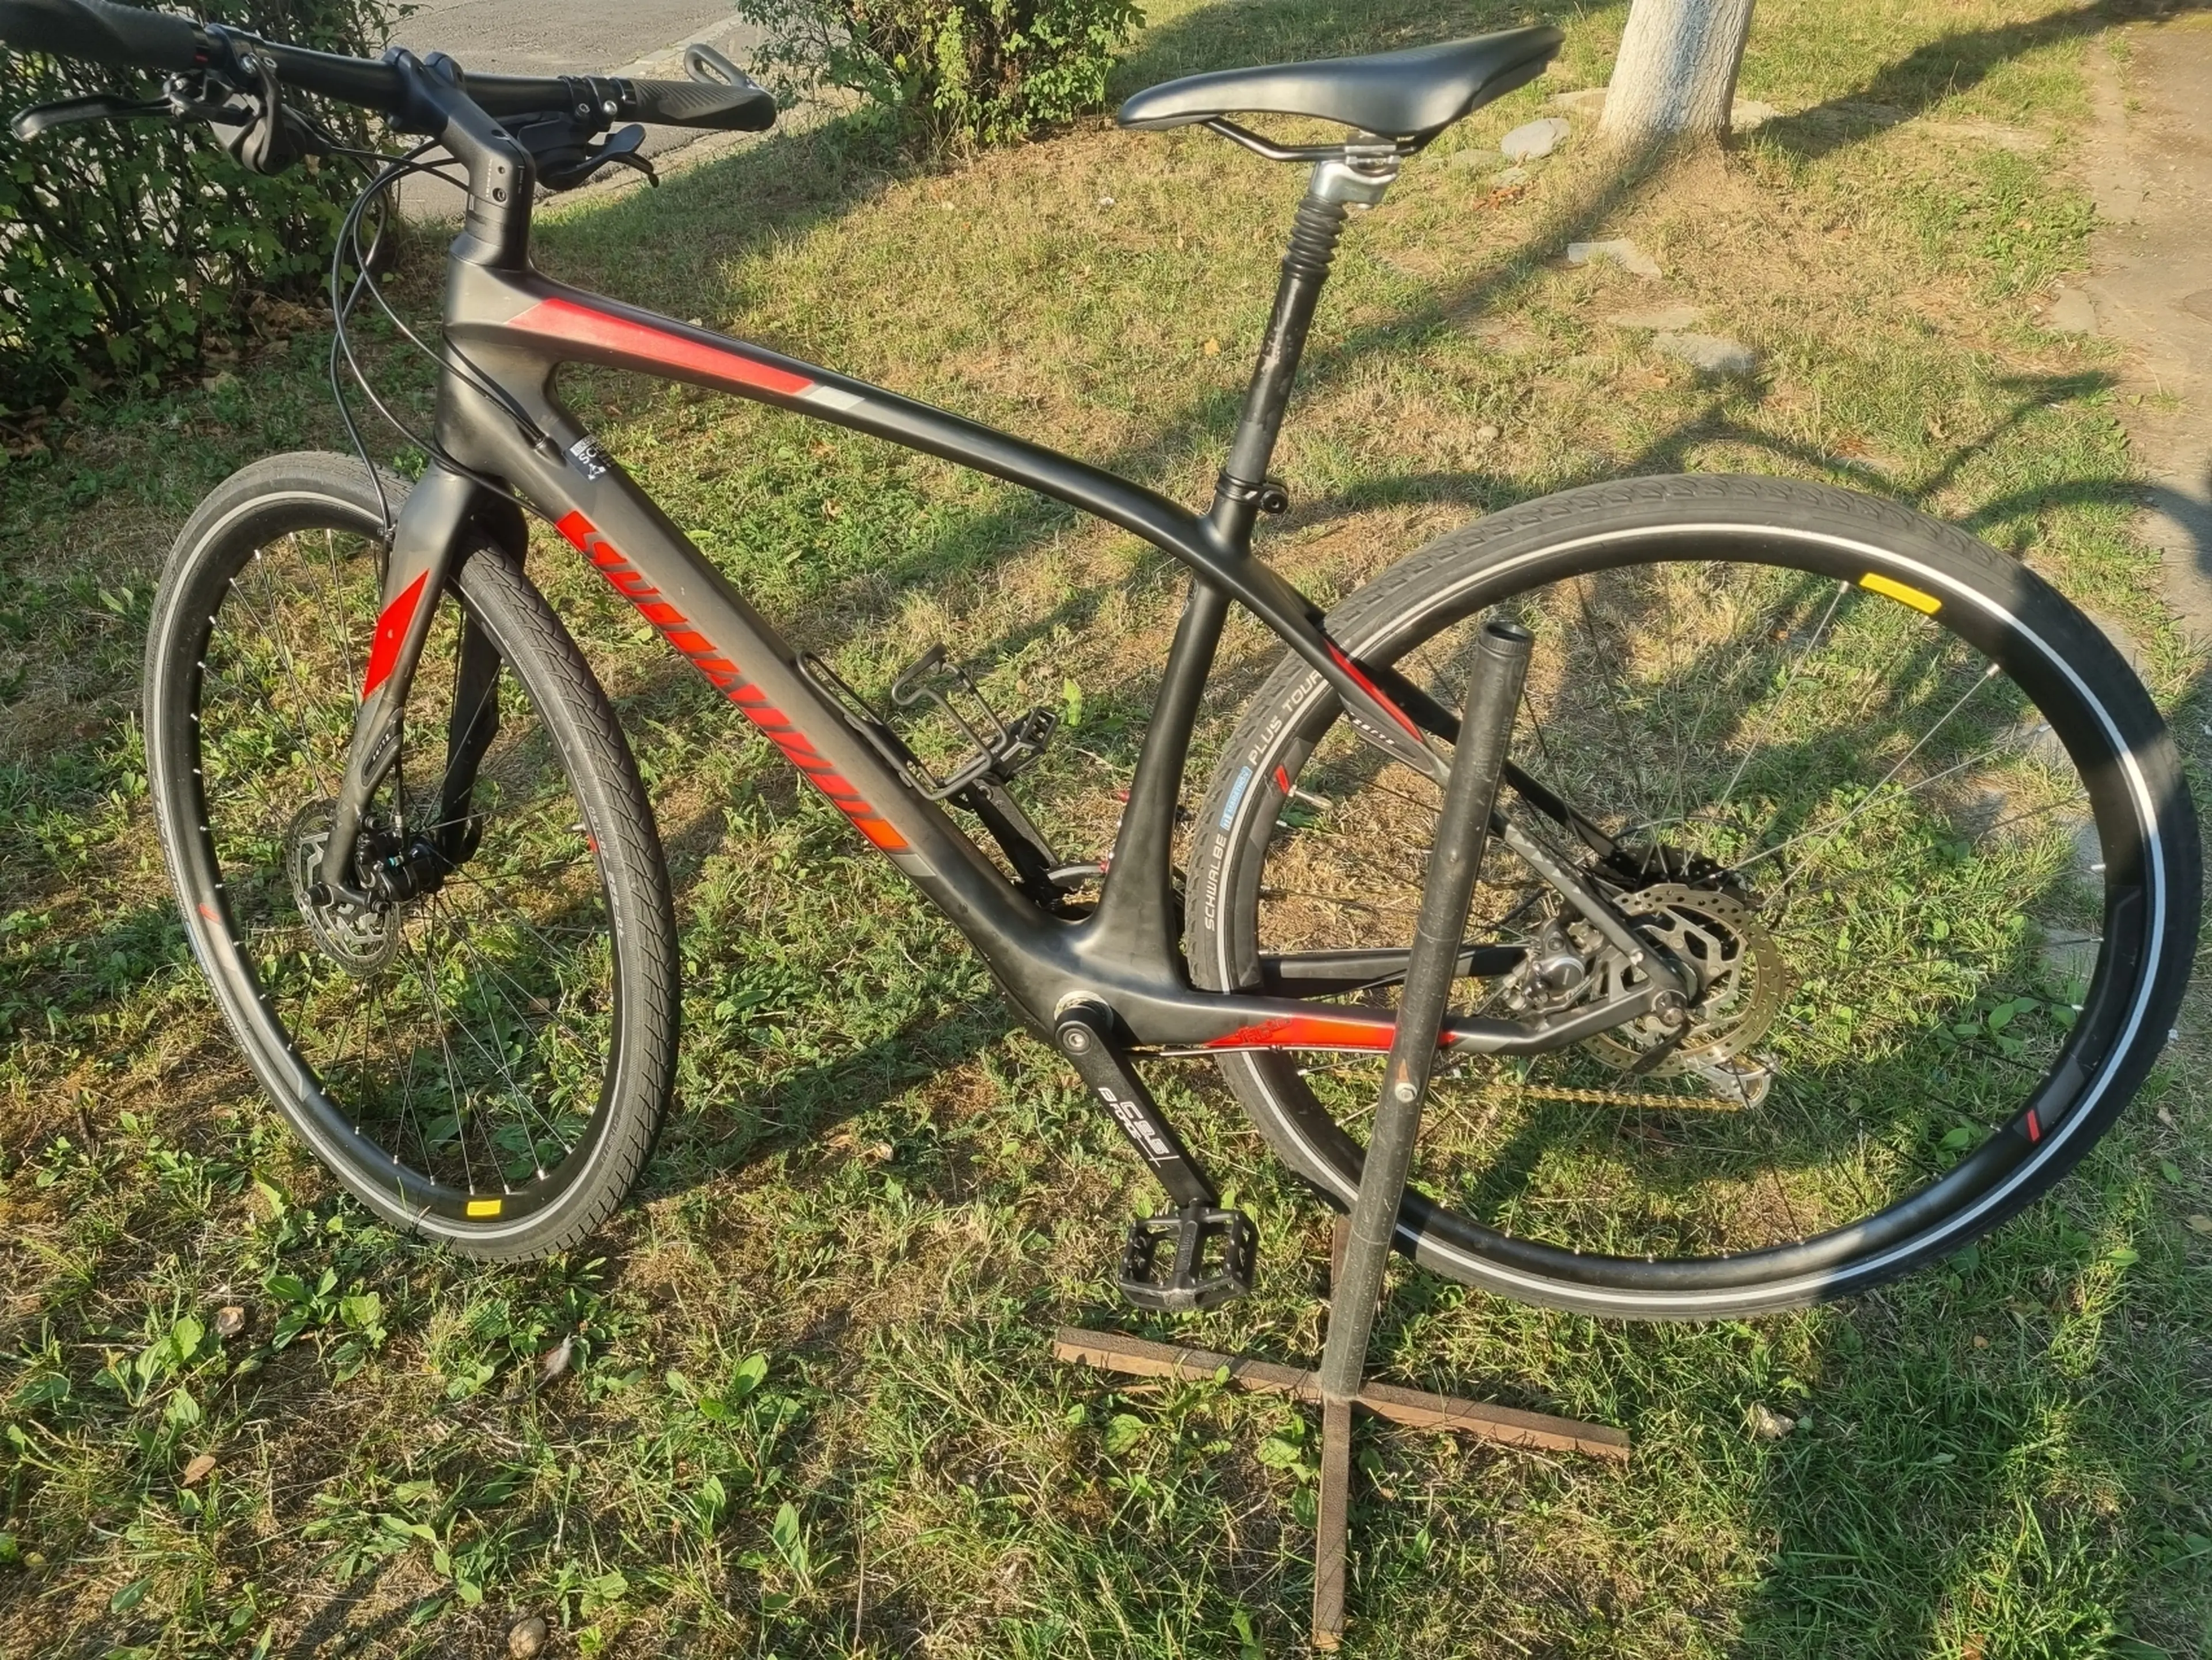 2. Specialized Sirrus Carbon Sport